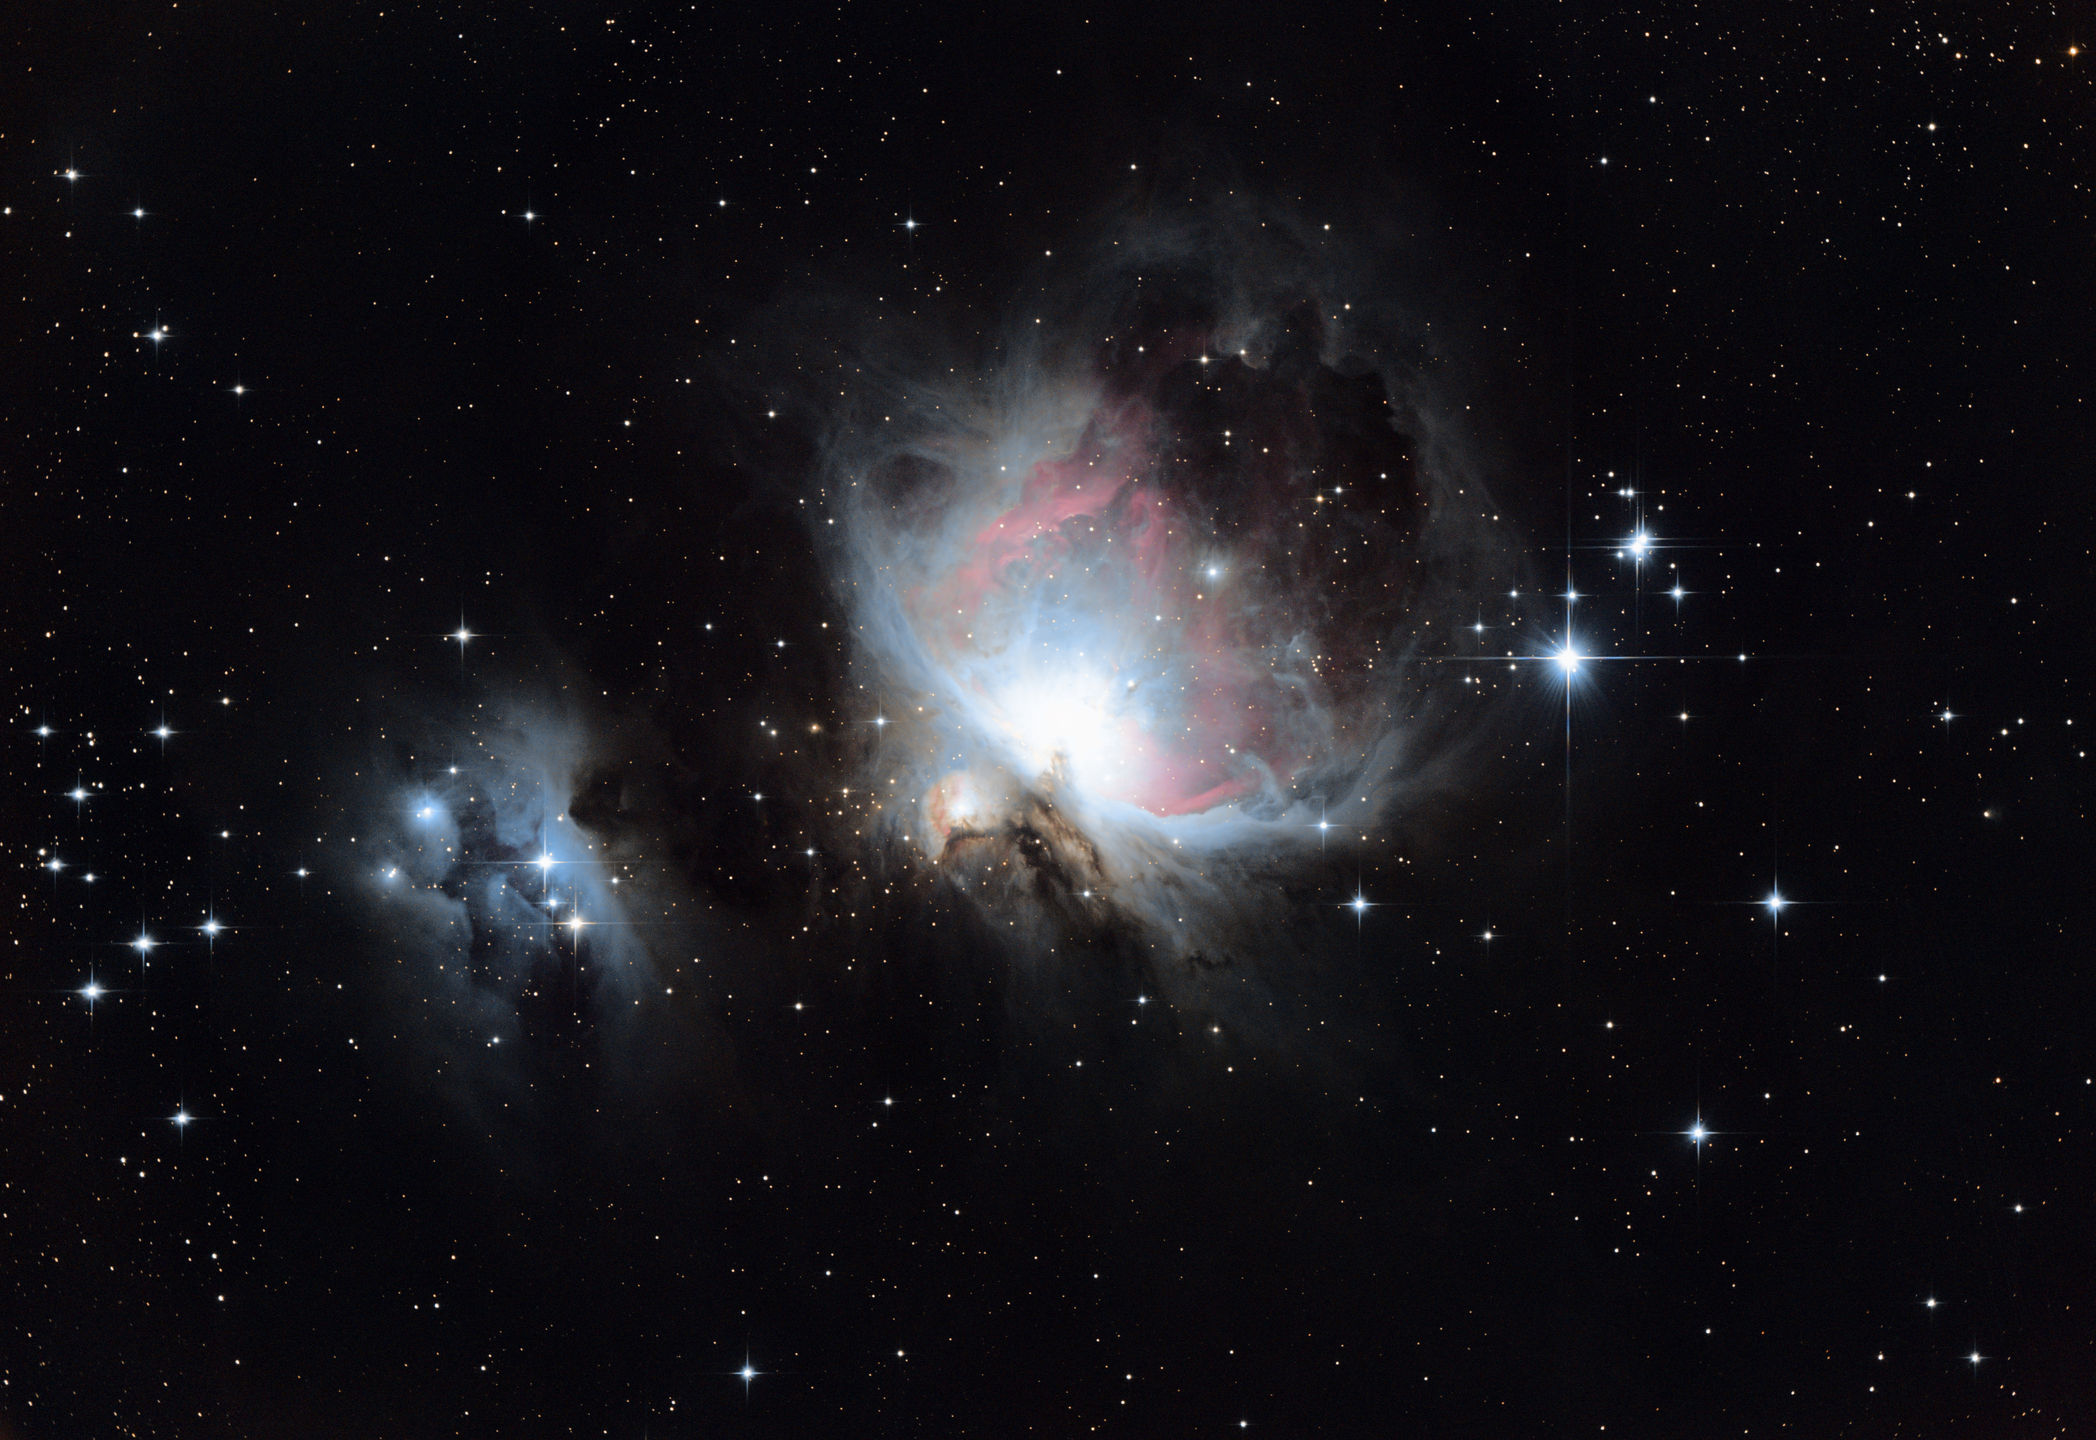 M42 the Orion Nebula - dithered, stacked, and processed with no other calibration data. This one was taken with the real telescope, not a camera lens as the earlier images were.